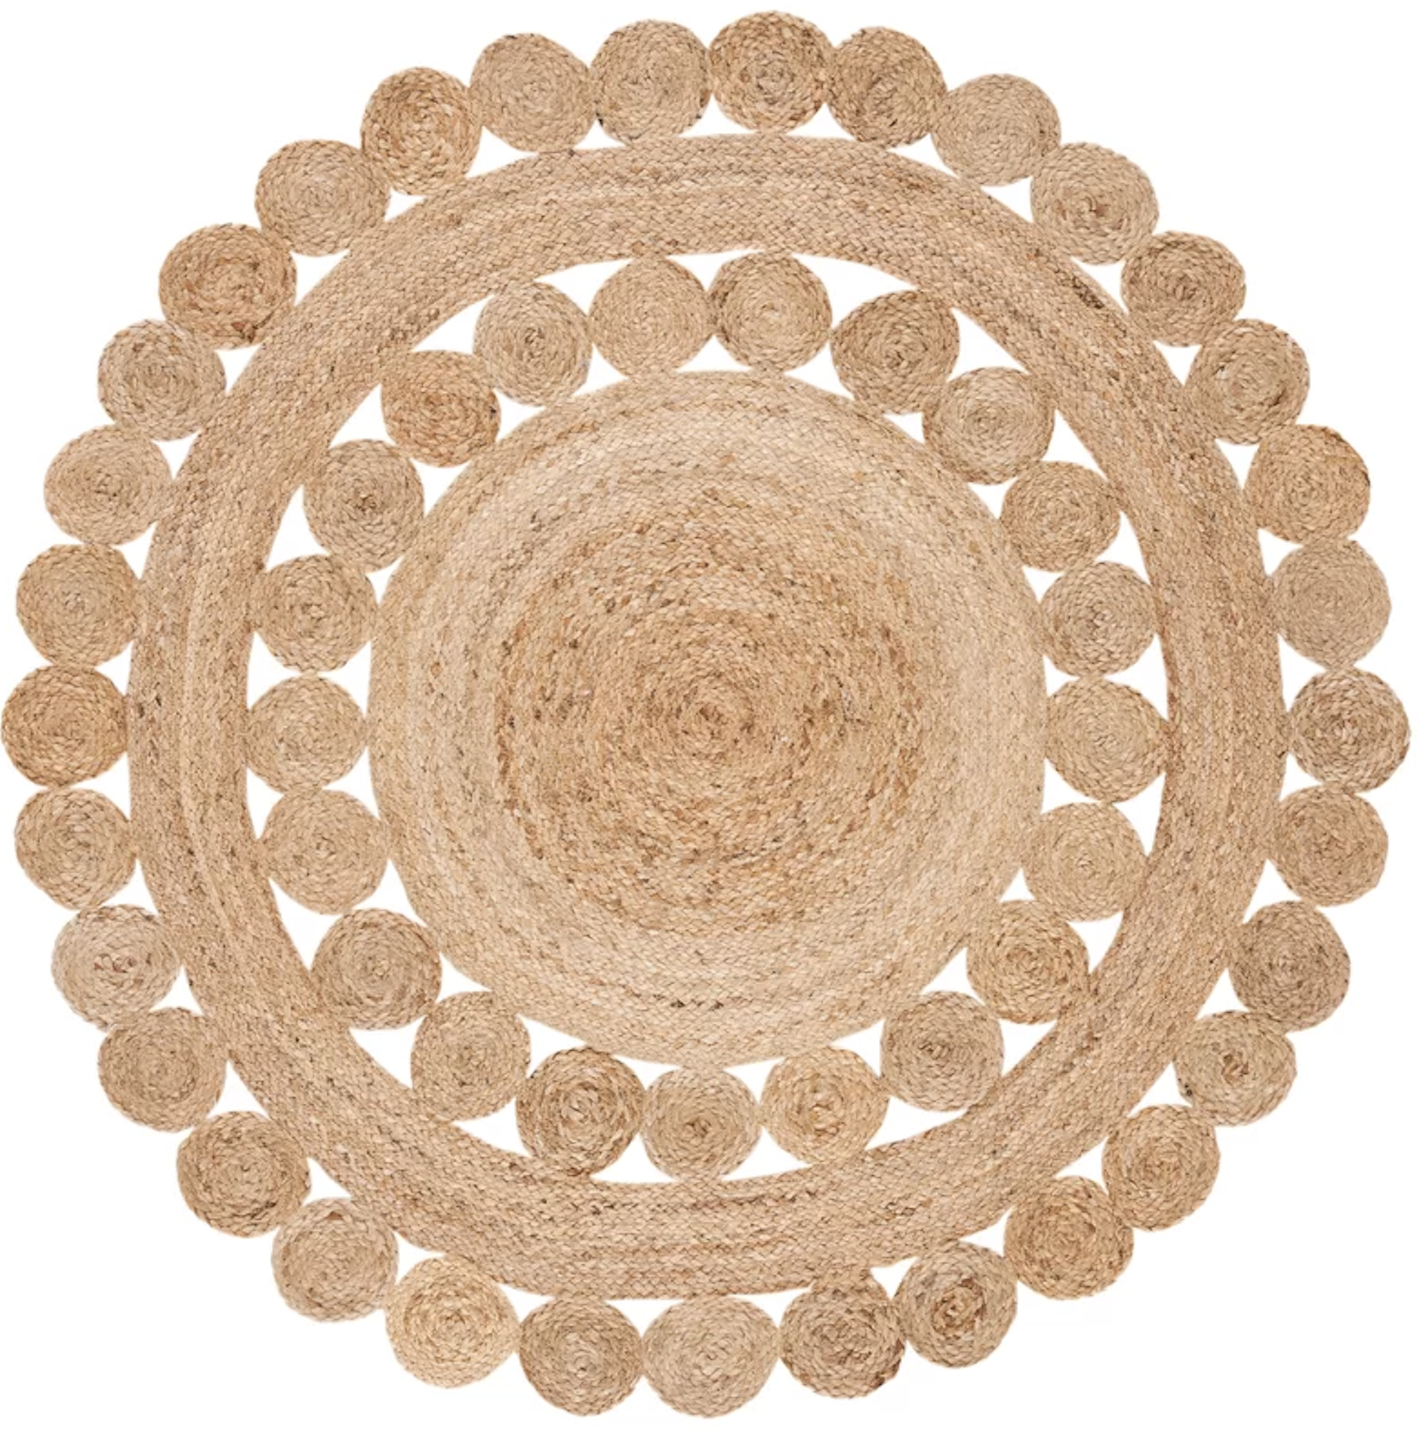 A round jute rug with pattern